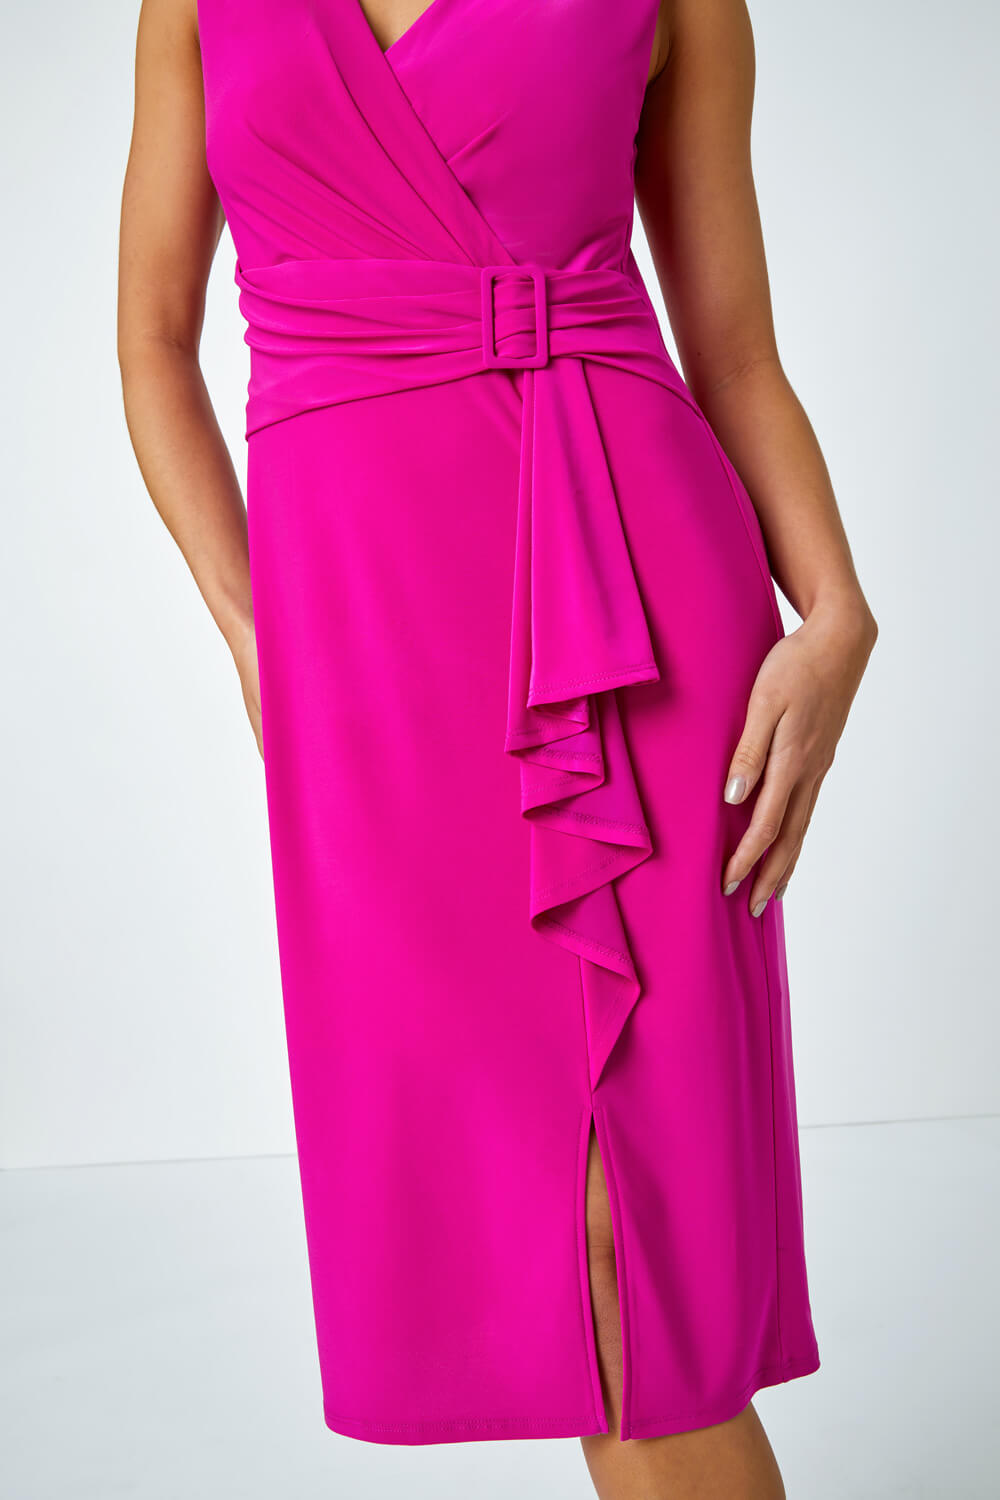 PINK Petite Buckle Waterfall Stretch Dress, Image 4 of 6